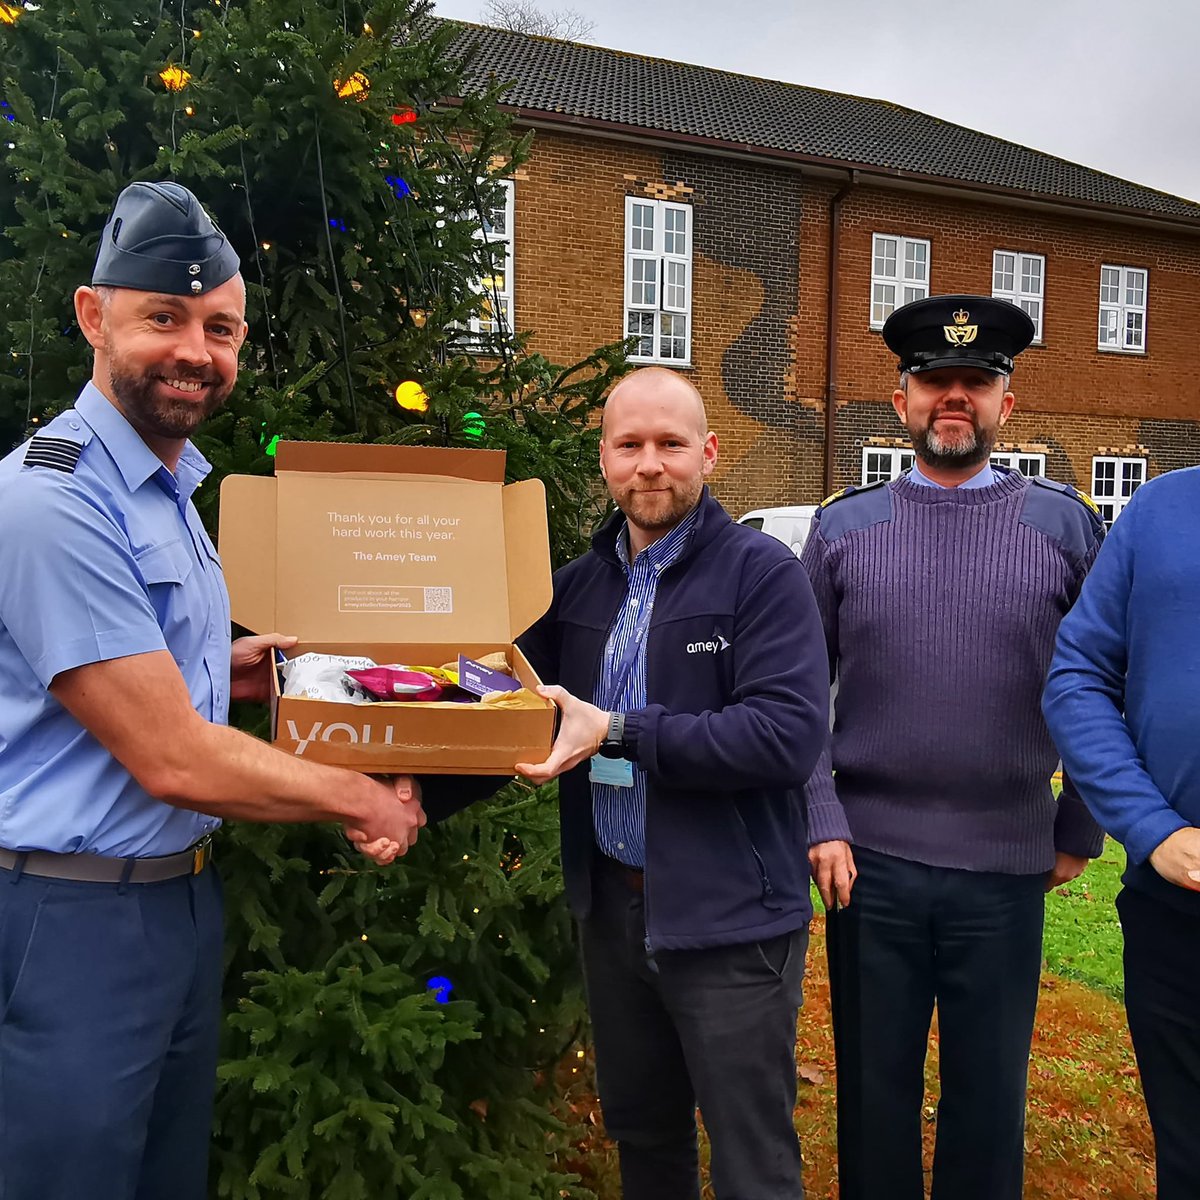 A big thank you to Amey Defence for choosing RAF Honington to receive Christmas Hampers to distribute amongst Veterans in our local communities. Station Commander Max Hayward received the hampers today from Dan Ashworth, Amey Customer Community Engagement Officer.